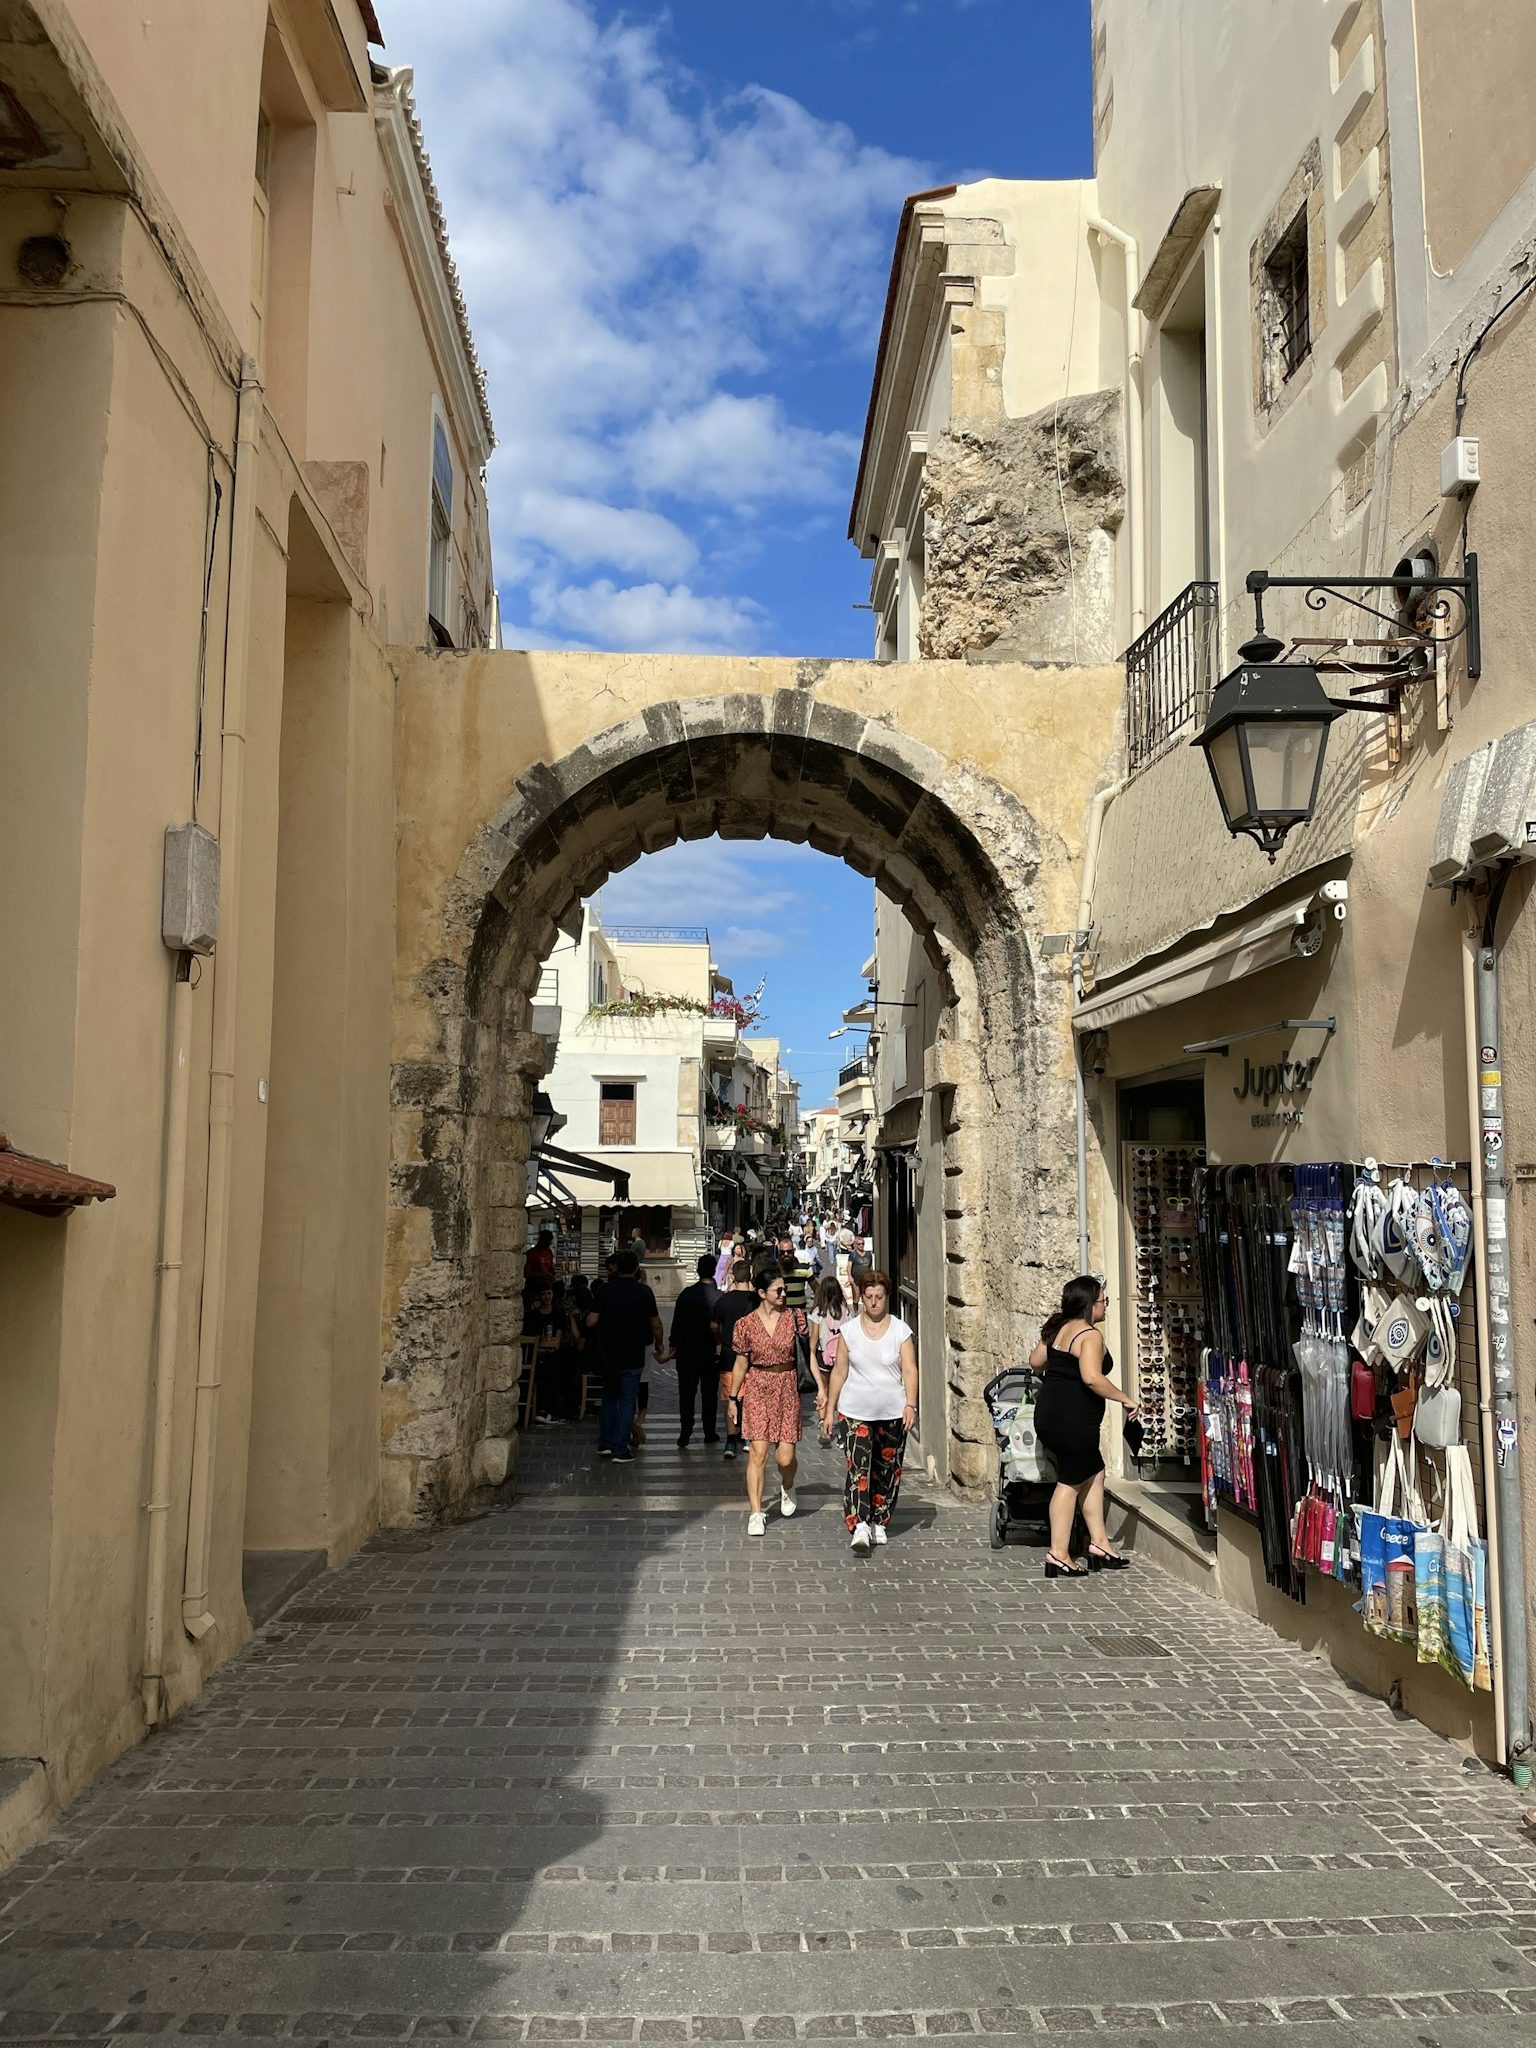 The Great Gate to the Old Town of Rethymno: A Historic Portal and Its Surroundings